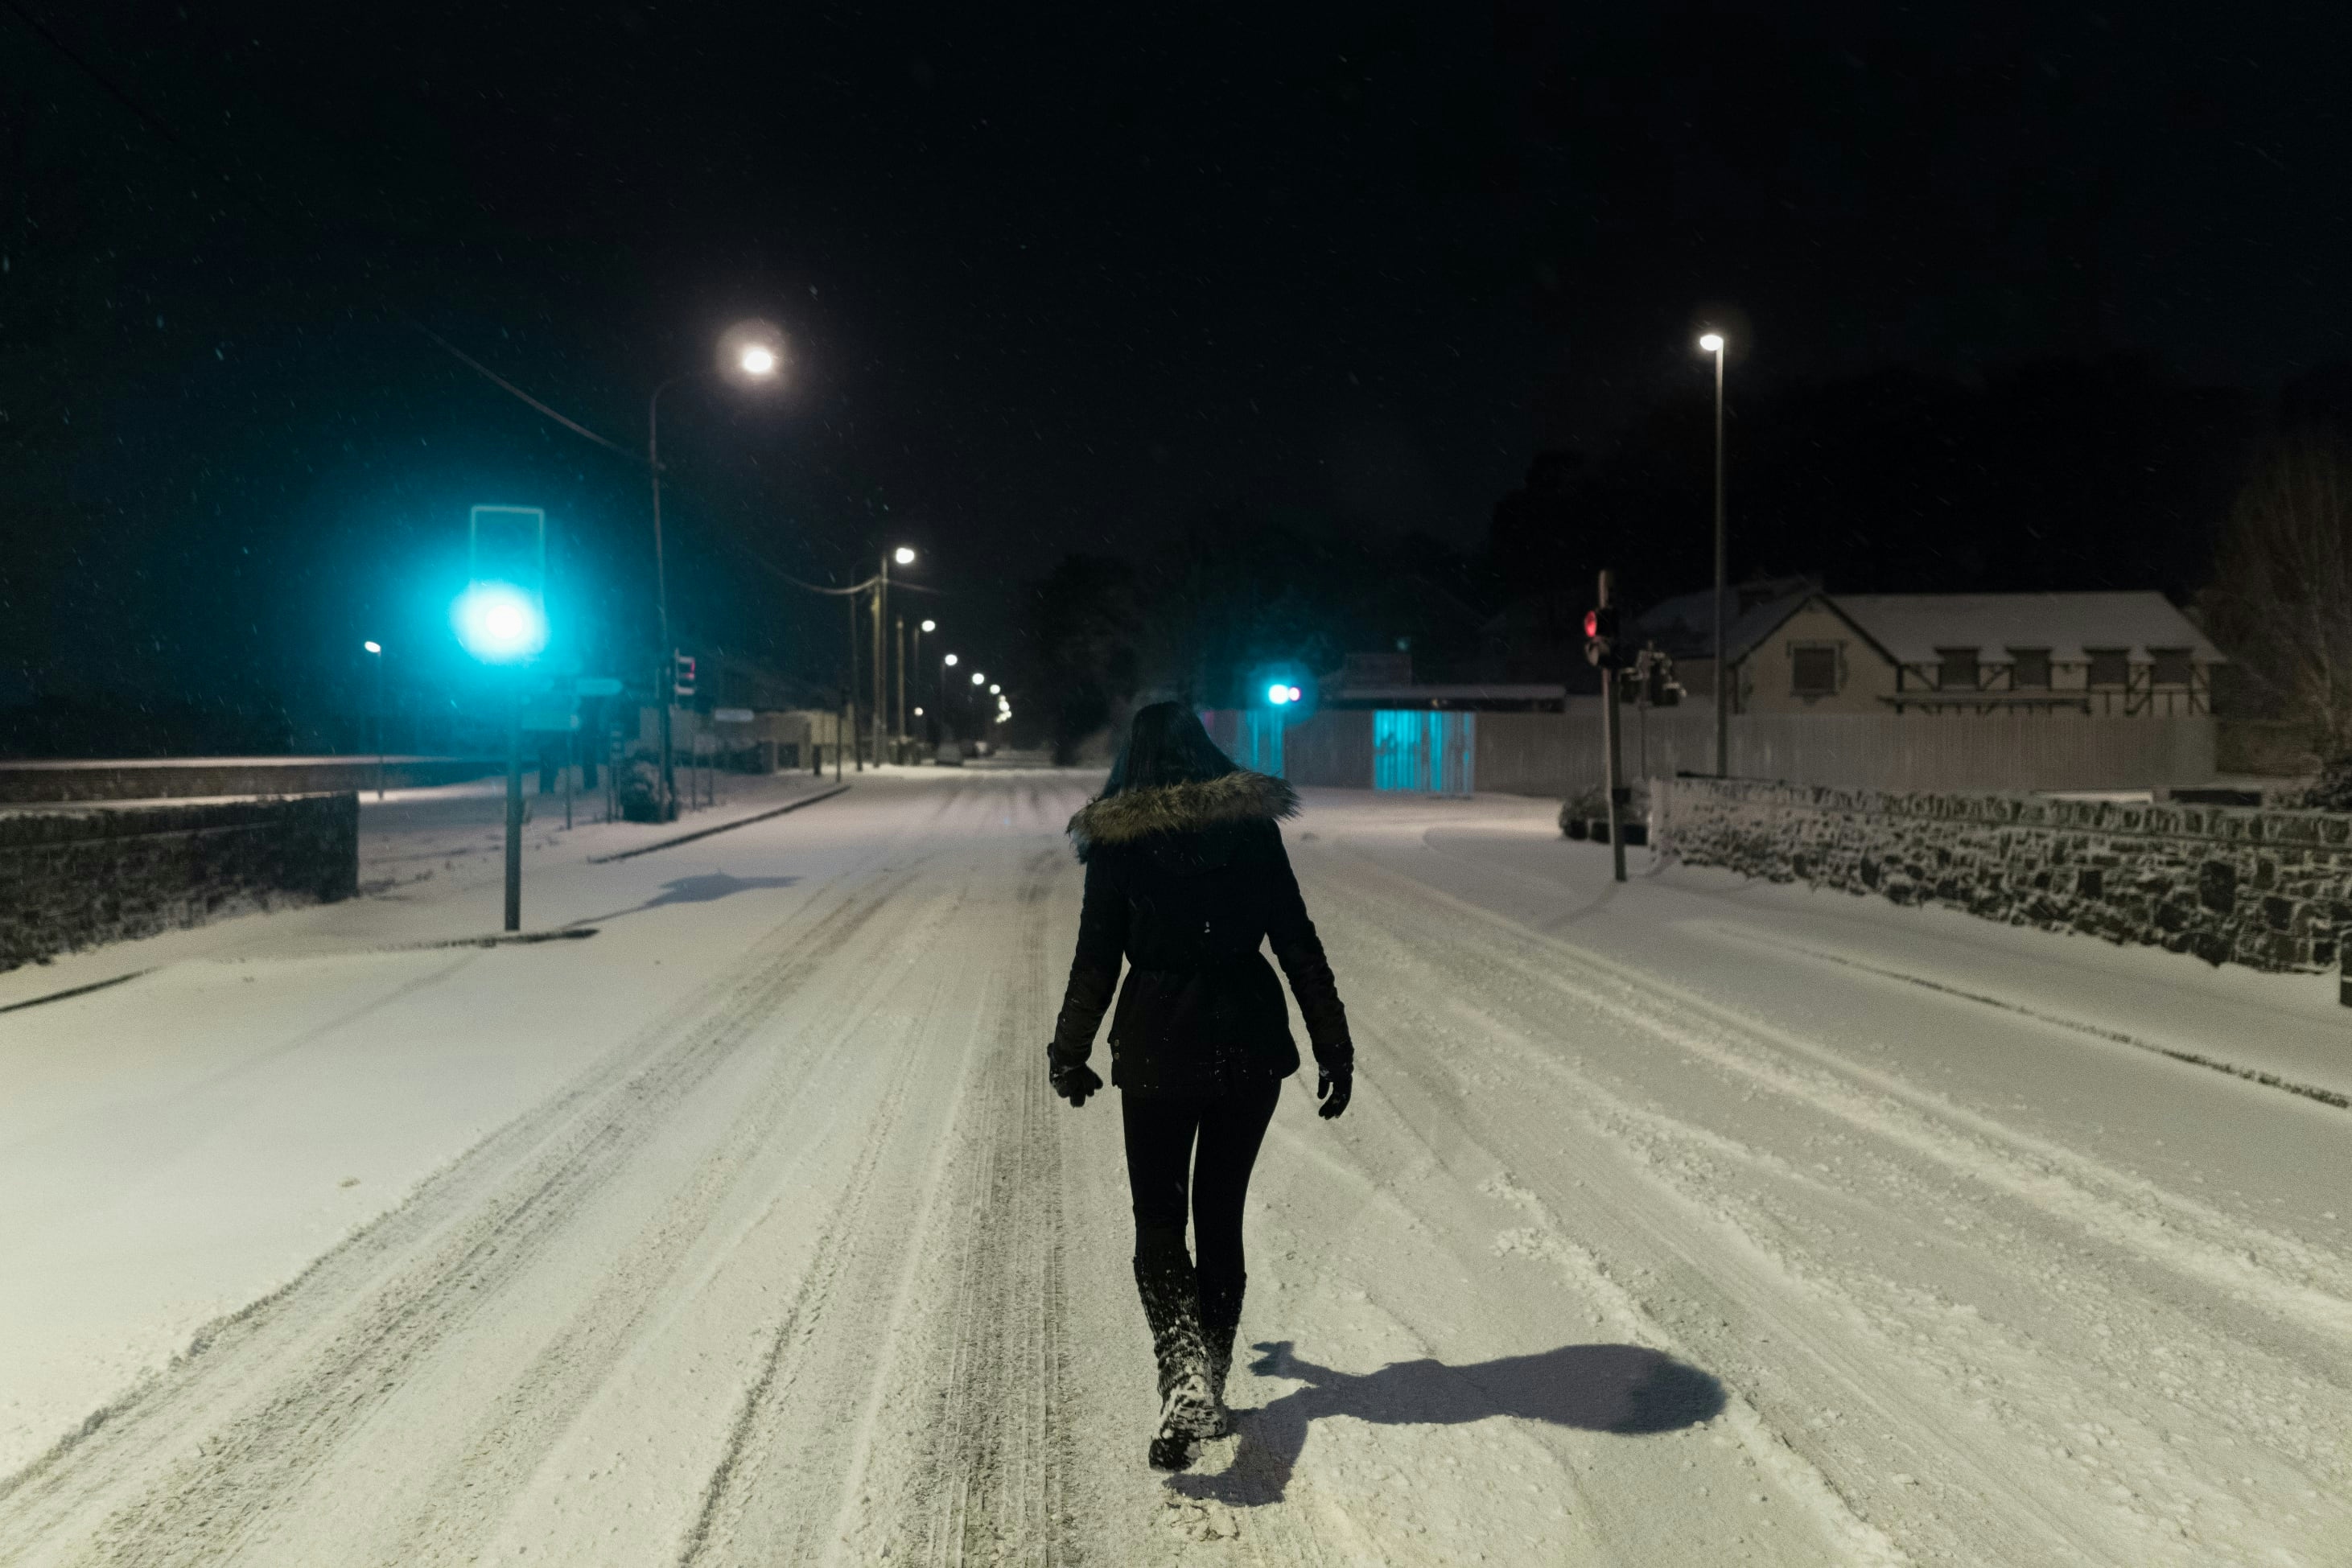 Laura walking on snow-covered street at midnight